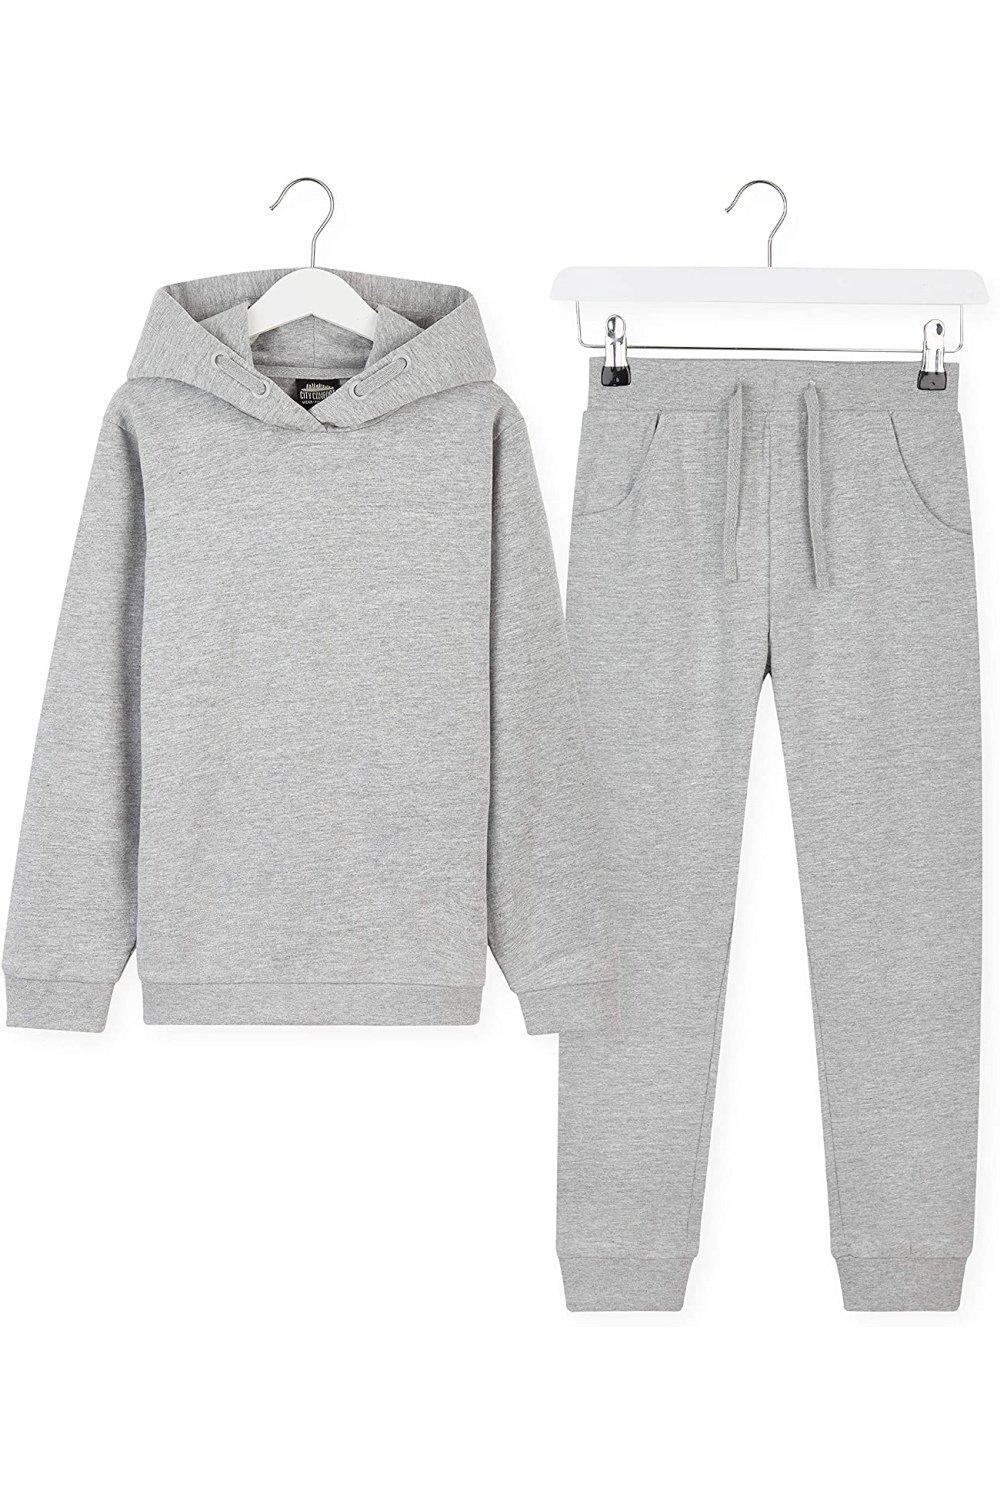 Tracksuit Set - Over The Head Hoodie and Joggers